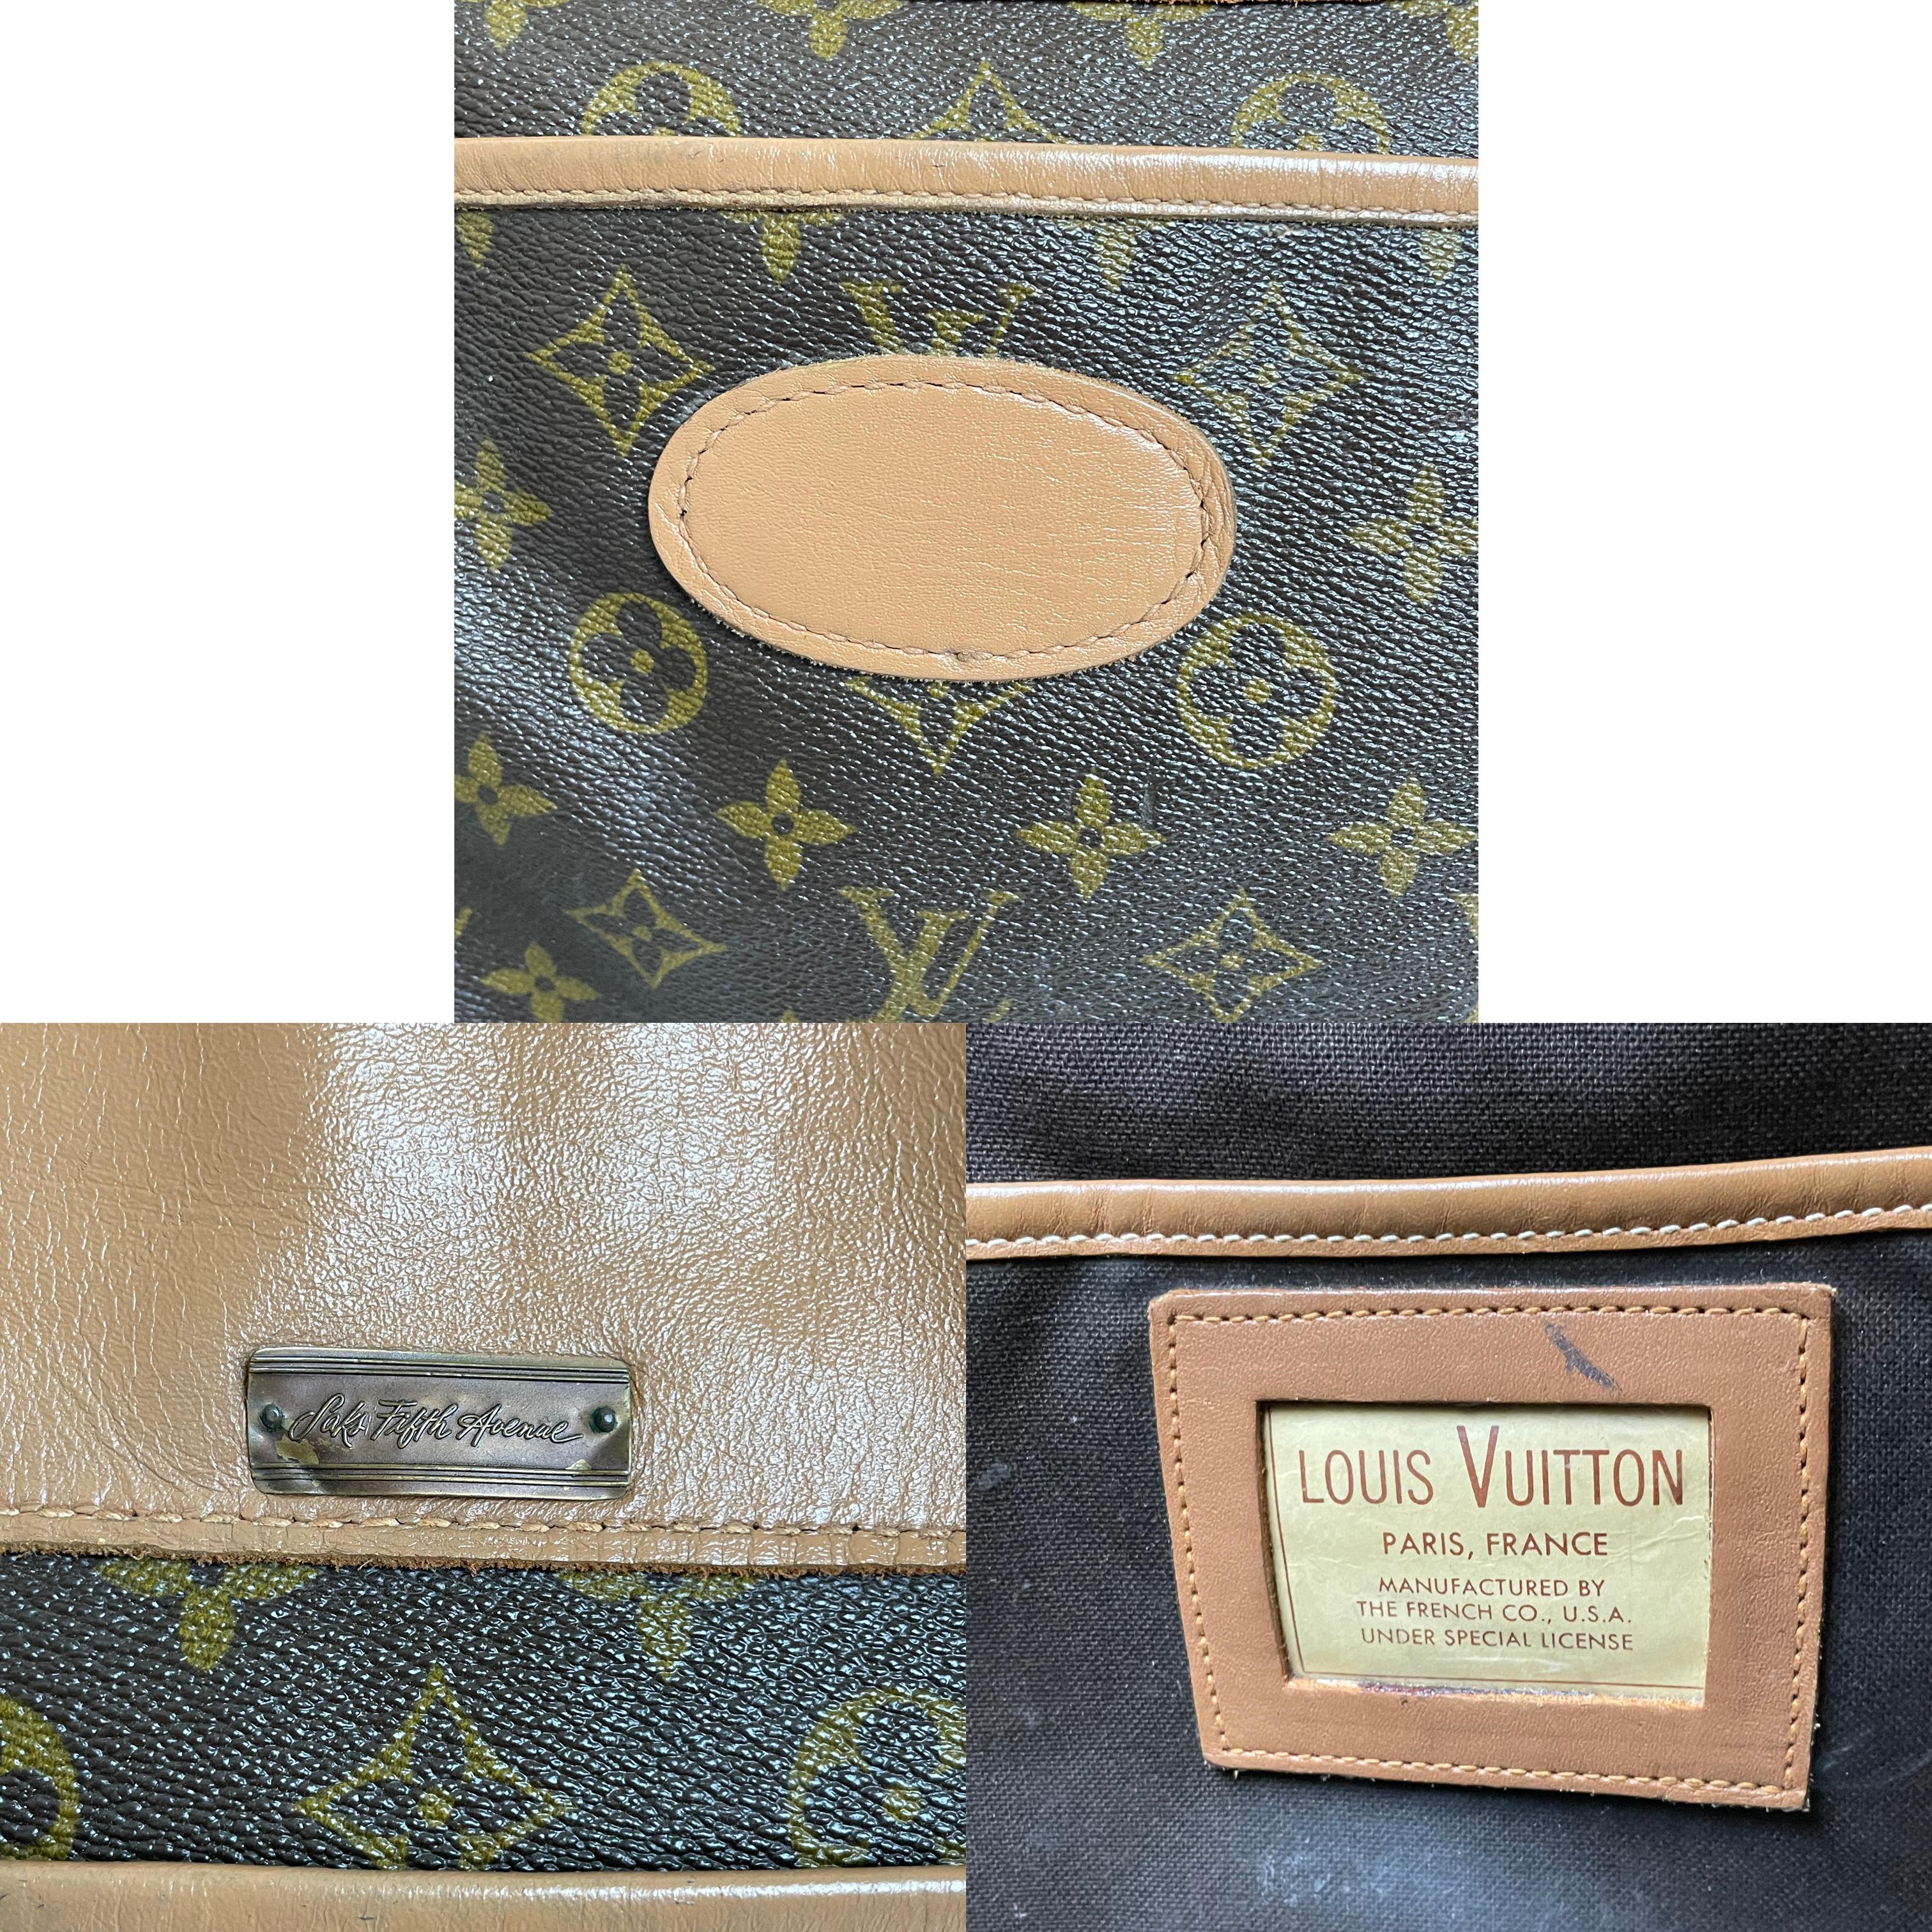 Louis Vuitton Tote Bag Travel Carry On French Luggage Co Saks 5th Ave Vintage  im Angebot 6